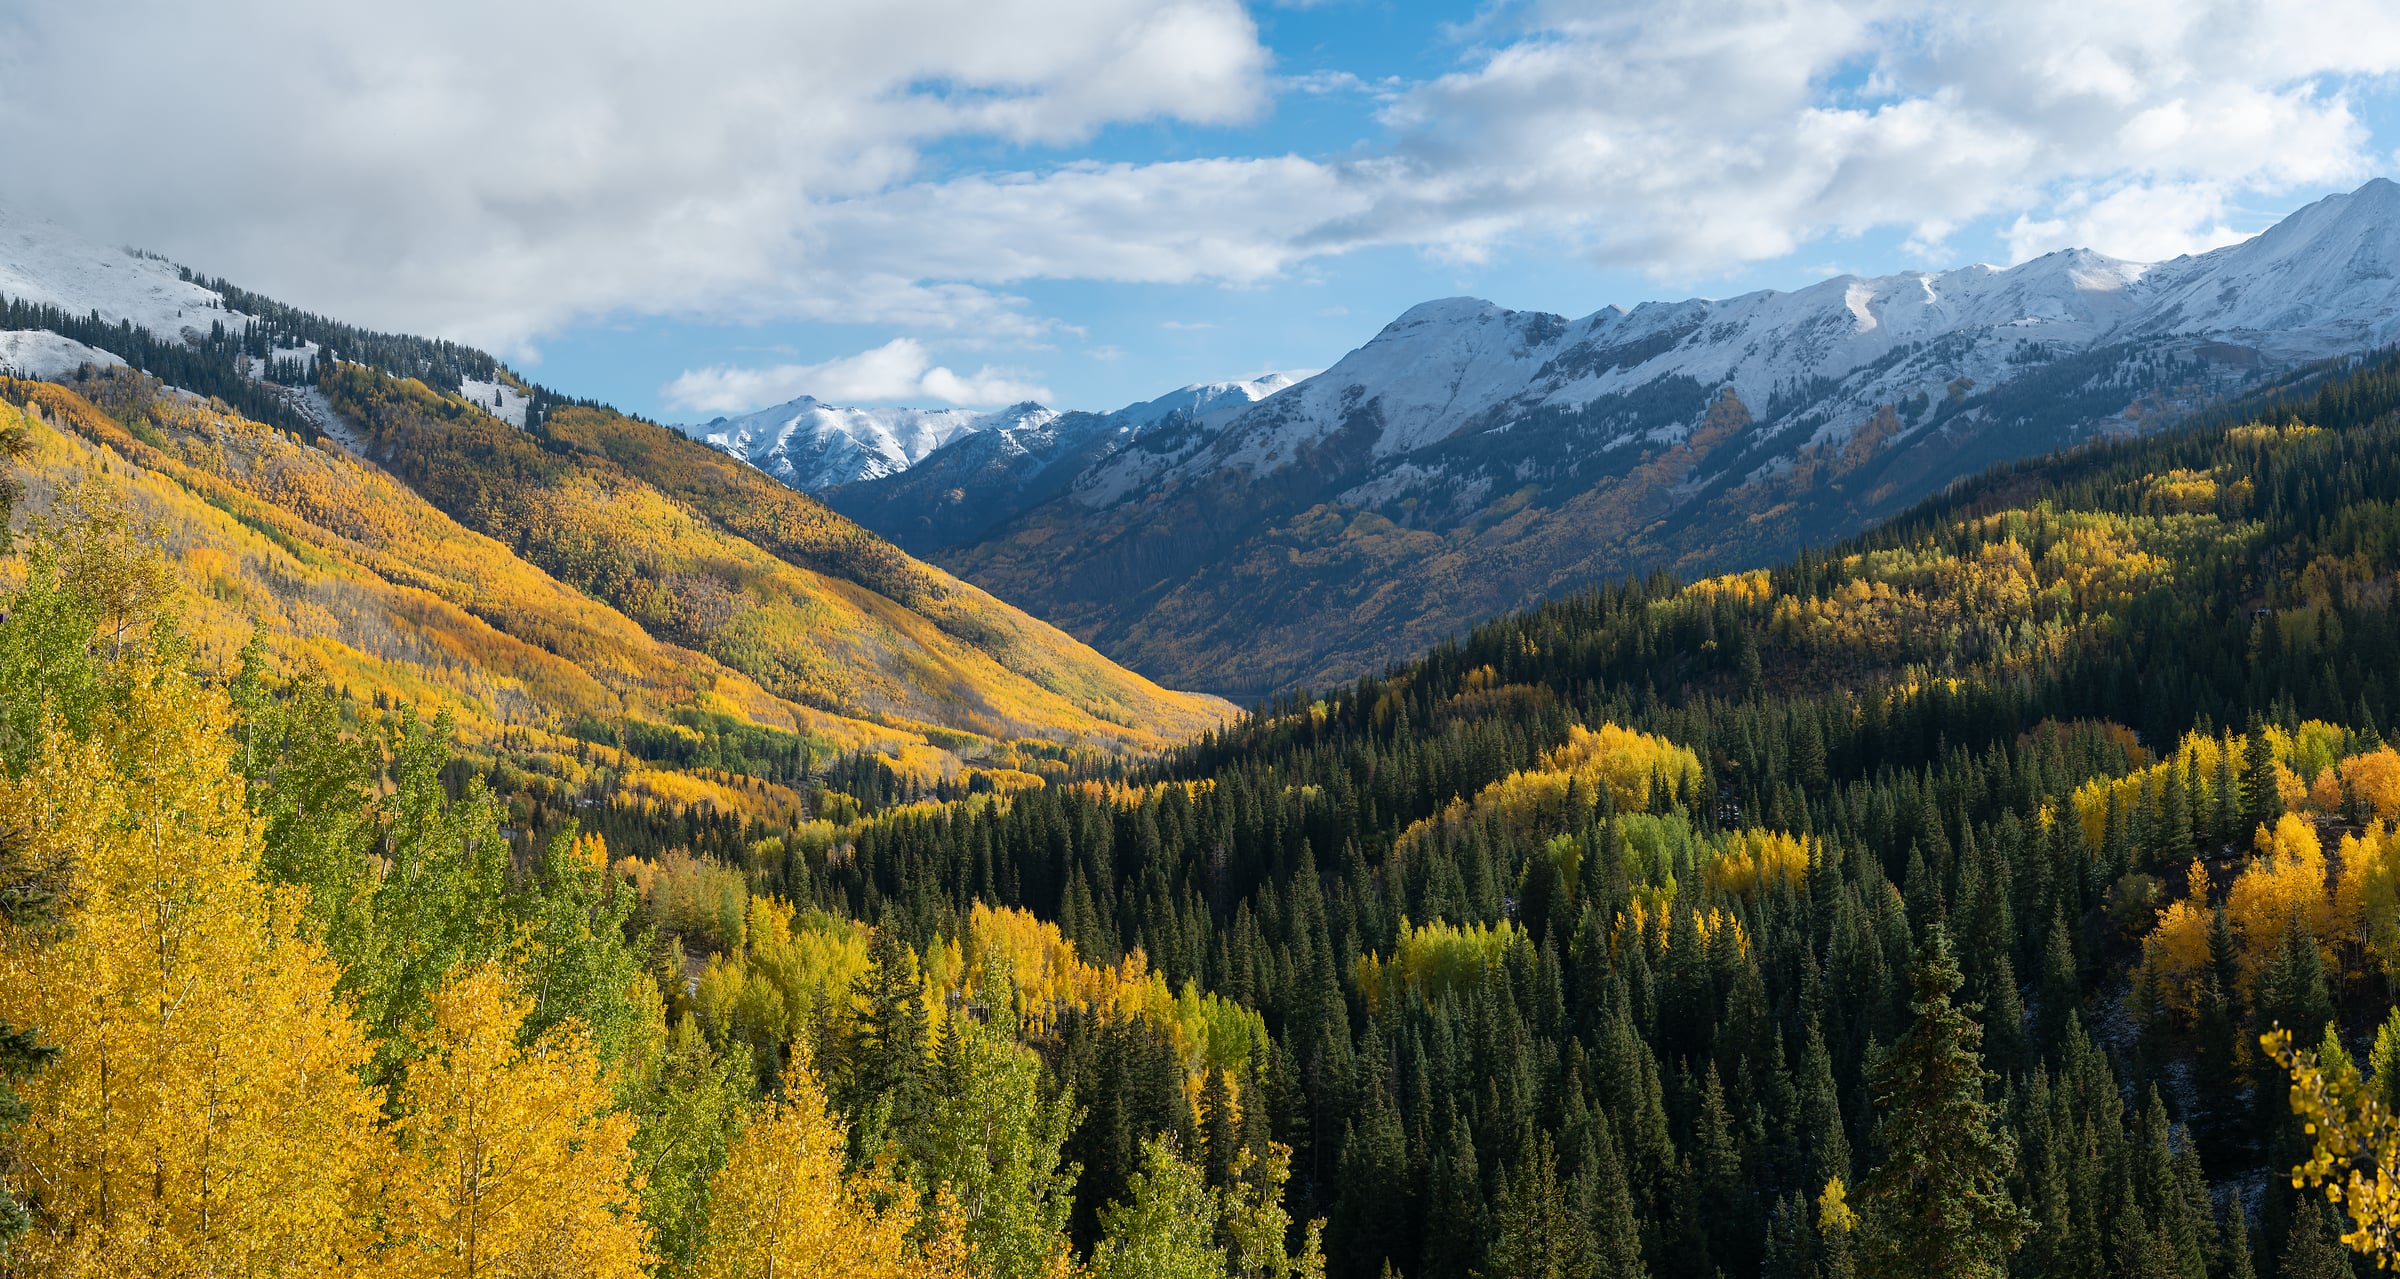 418 megapixels! A very high resolution, large-format VAST photo print of an autumn landscape with snowy mountains and fall foliage; photograph created by Greg Probst in Red Mountain Pass, Colorado.